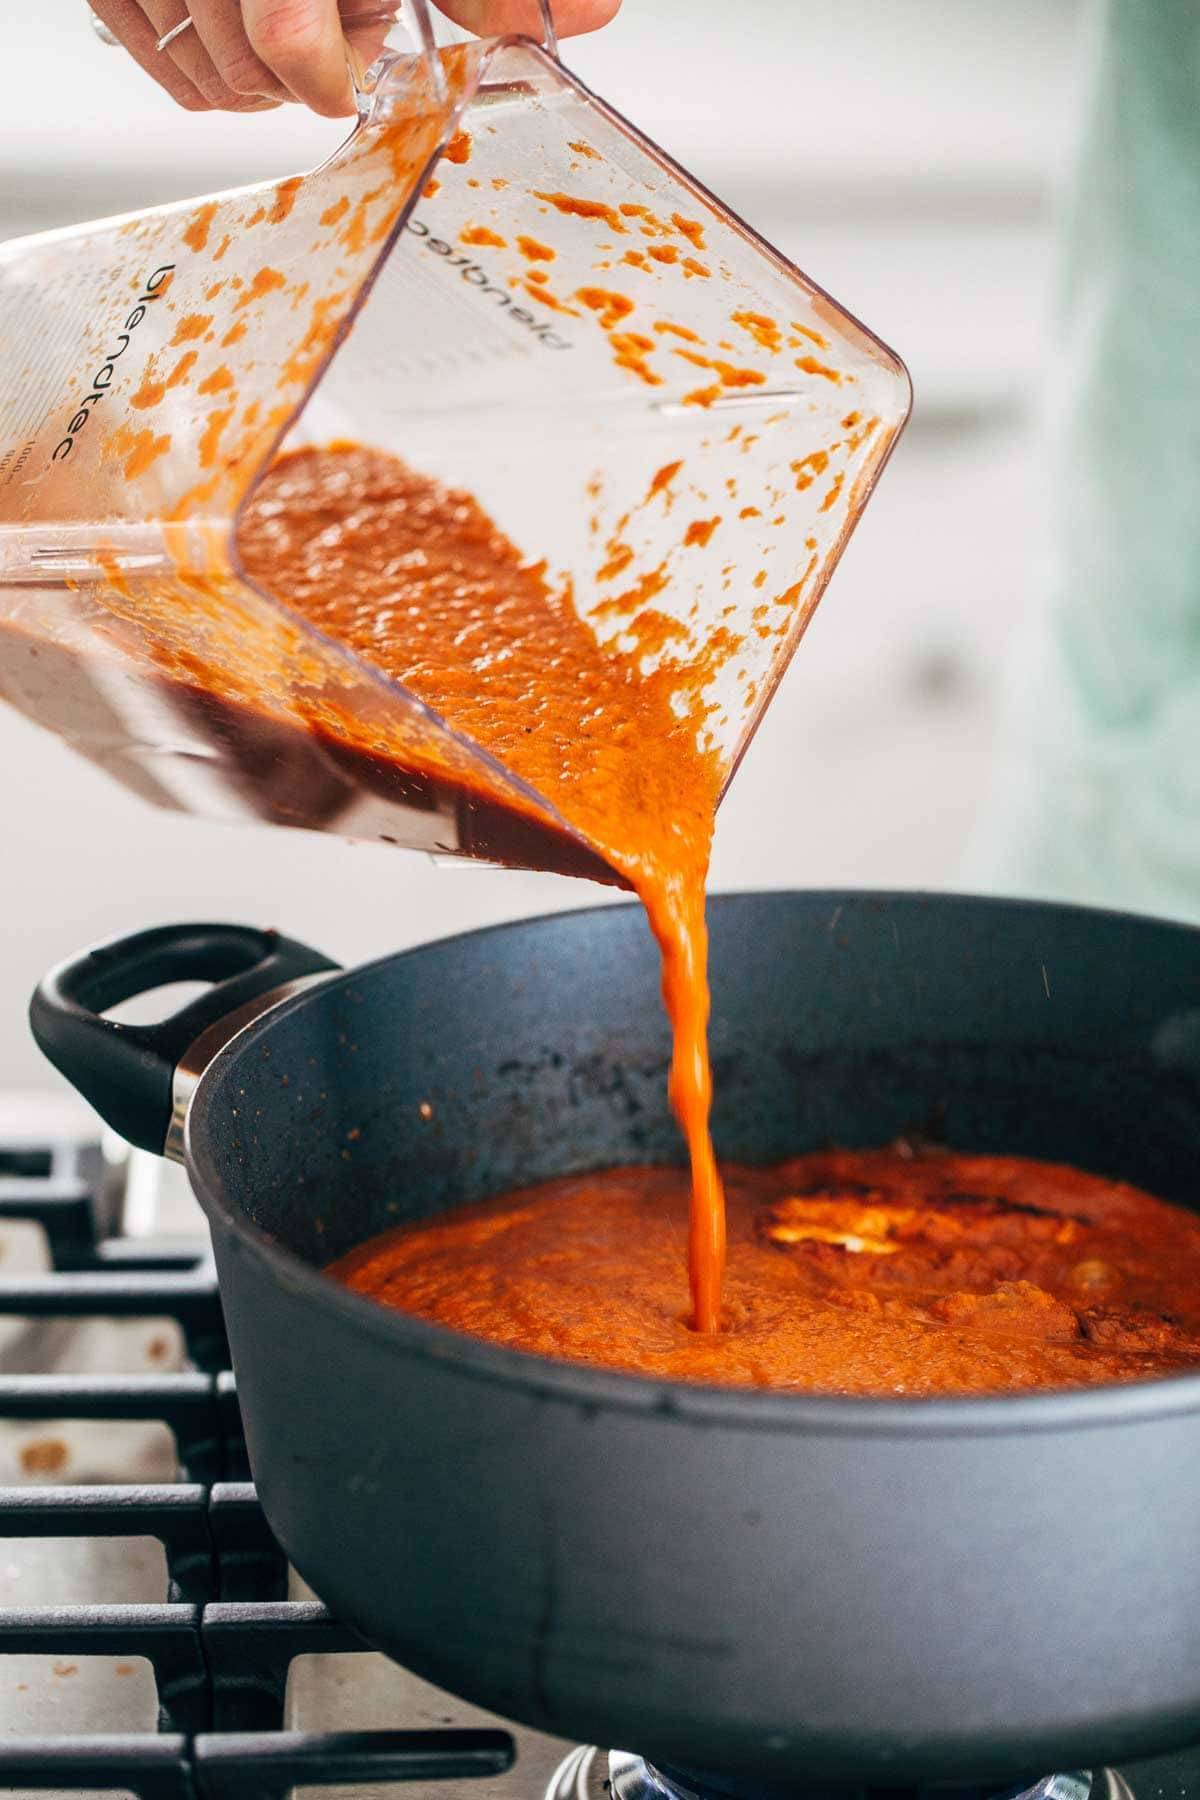 Sauce in a blender pouring into a skillet.